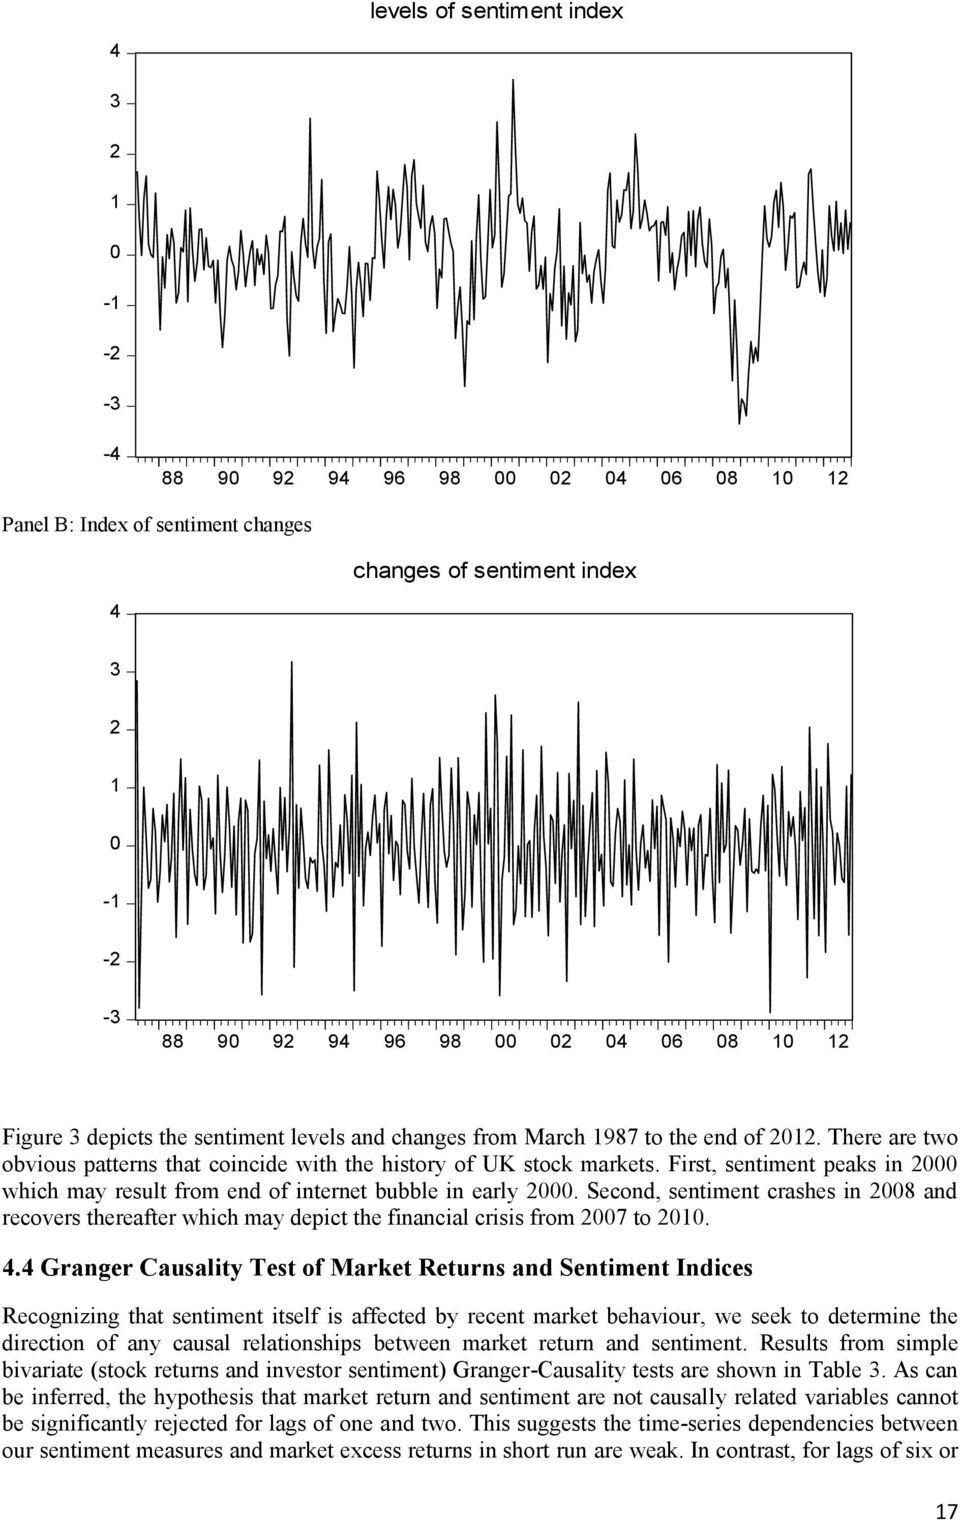 First, sentiment peaks in 2000 which may result from end of internet bubble in early 2000.